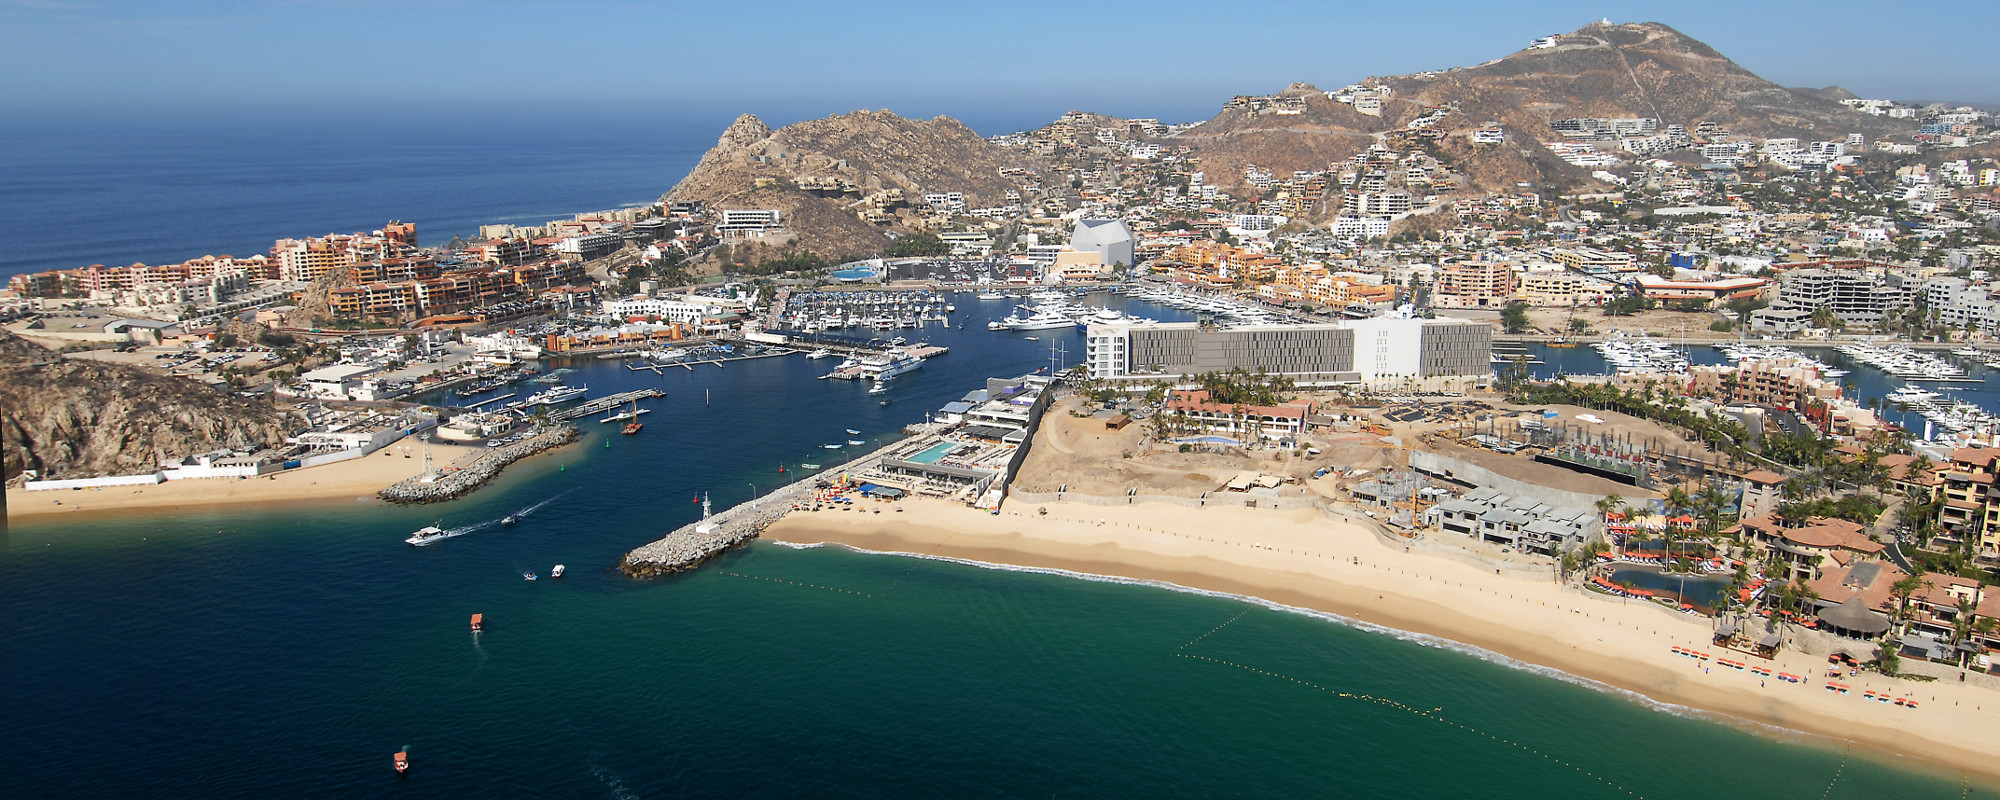 Beach and city in Cabo San Lucas